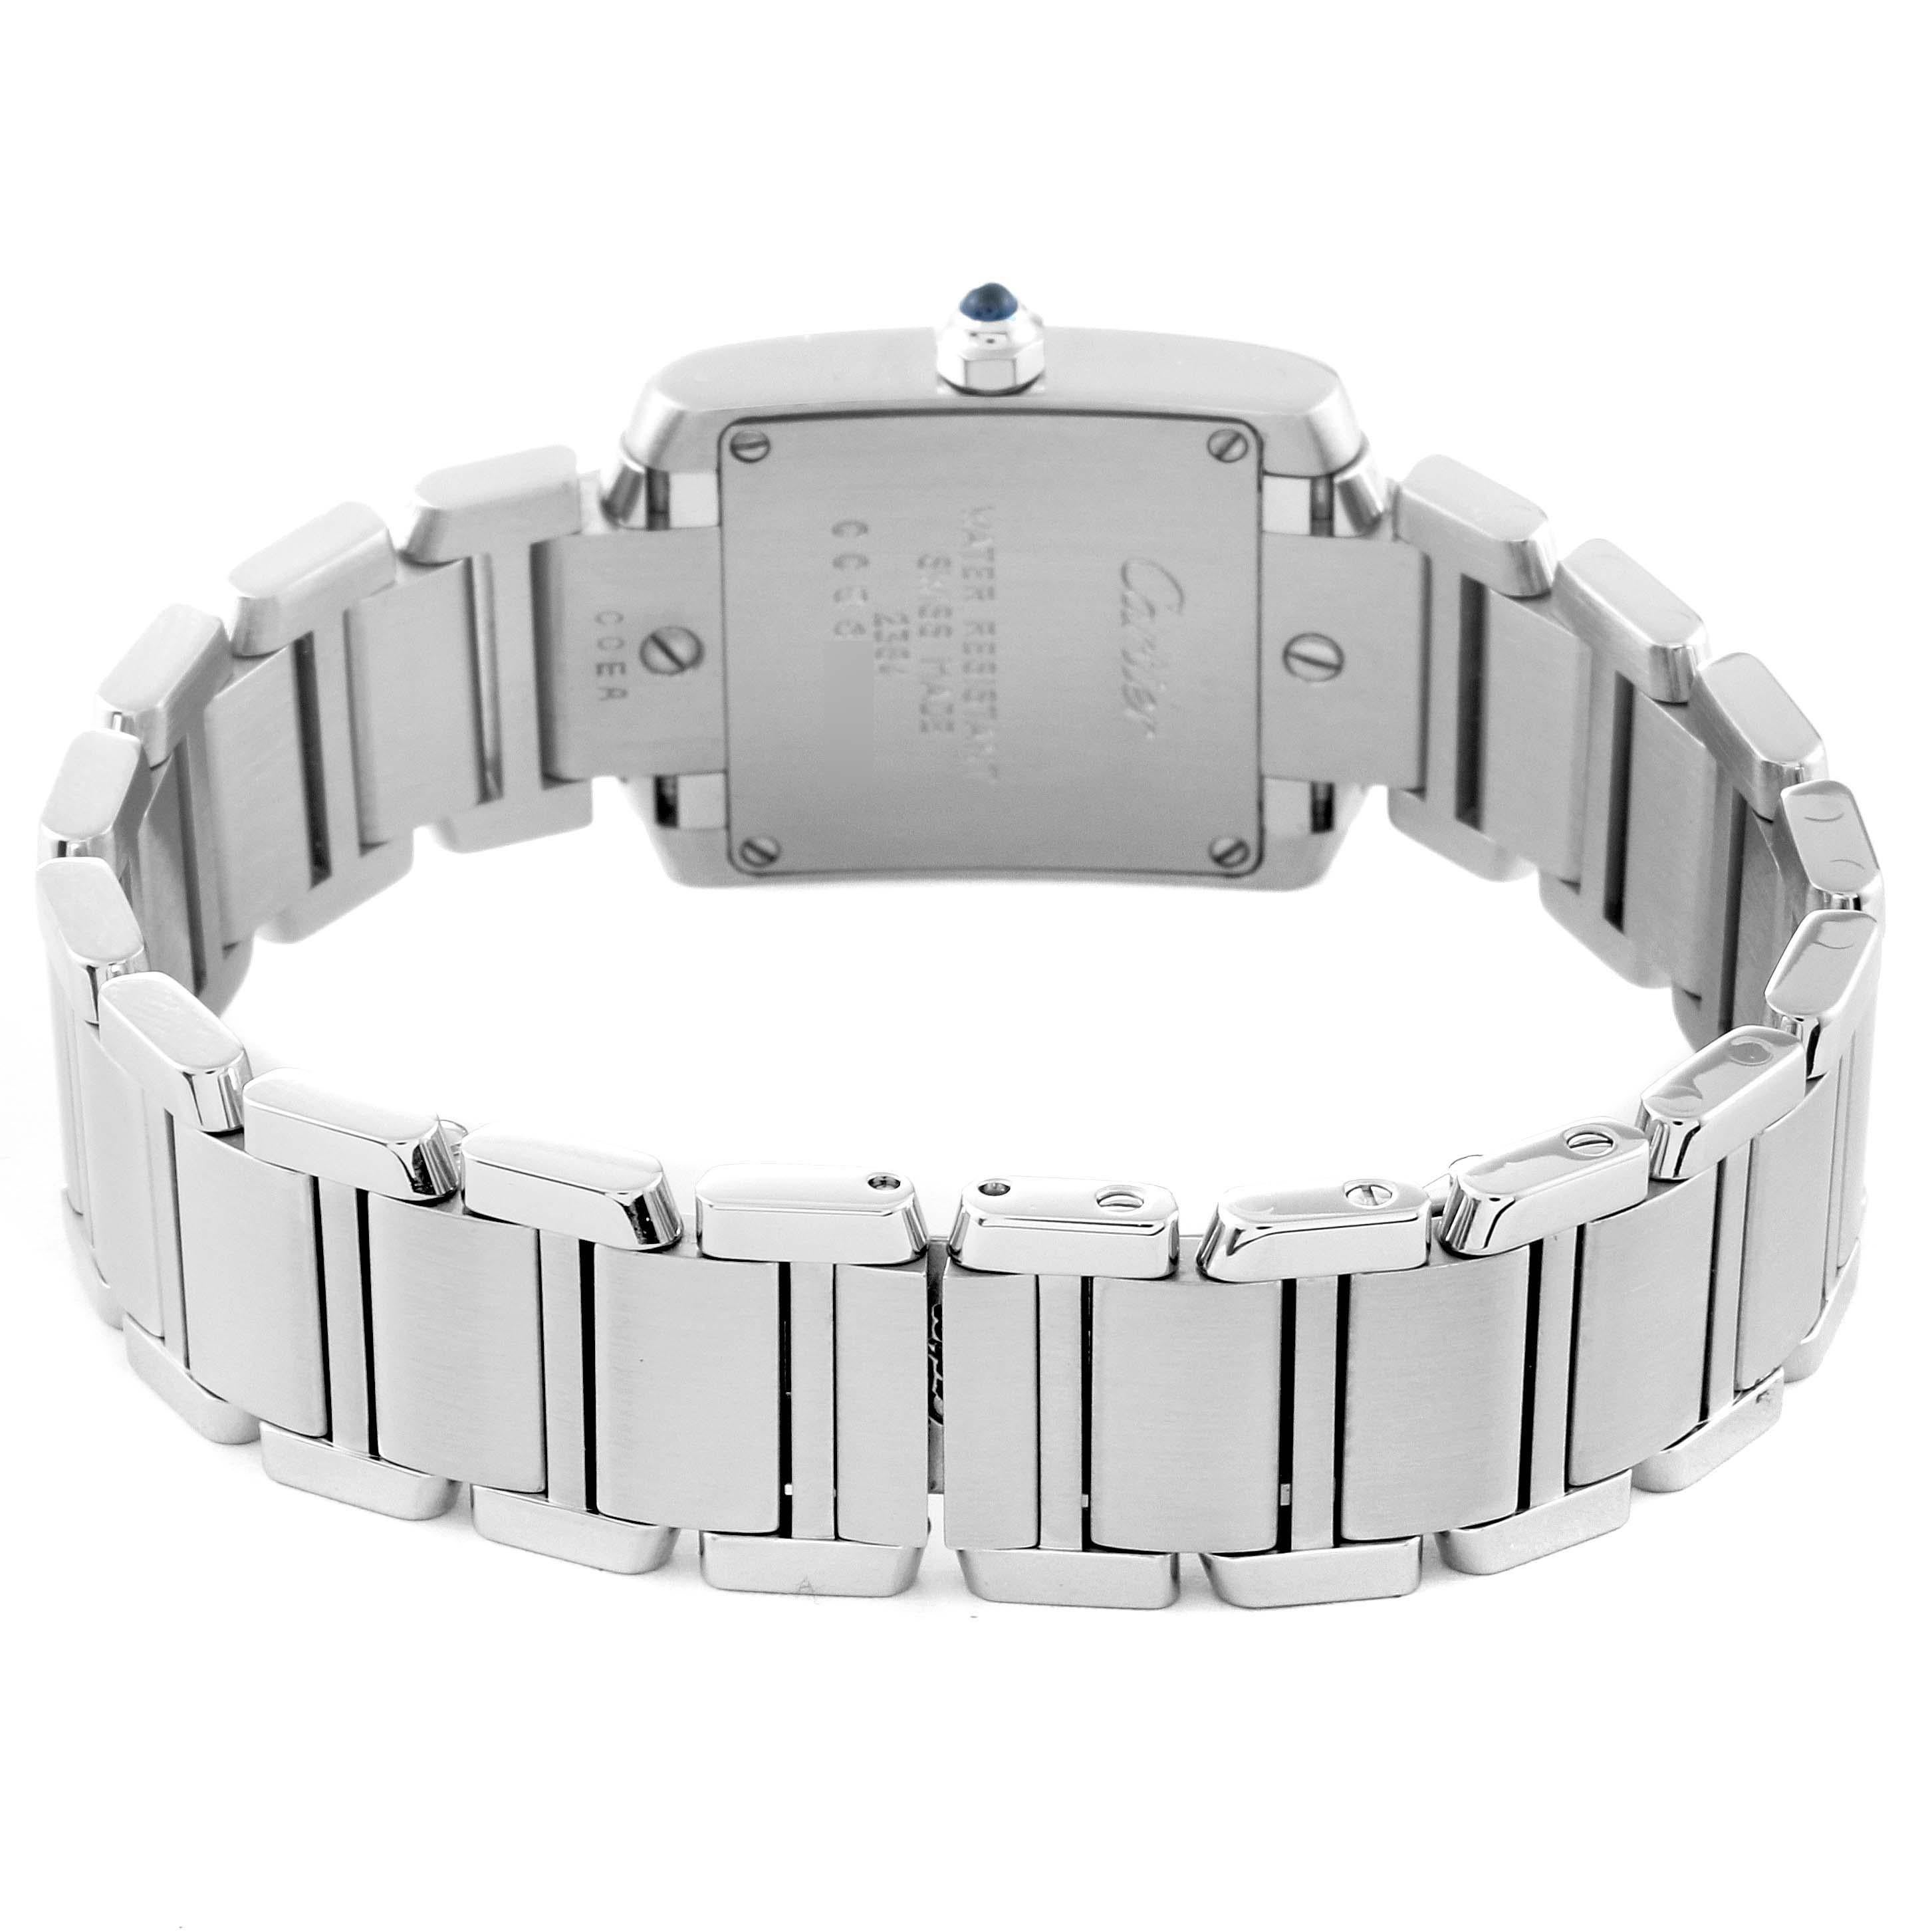 Cartier Tank Francaise Small Silver Dial Steel Ladies Watch W51008Q3 Box Papers en vente 5